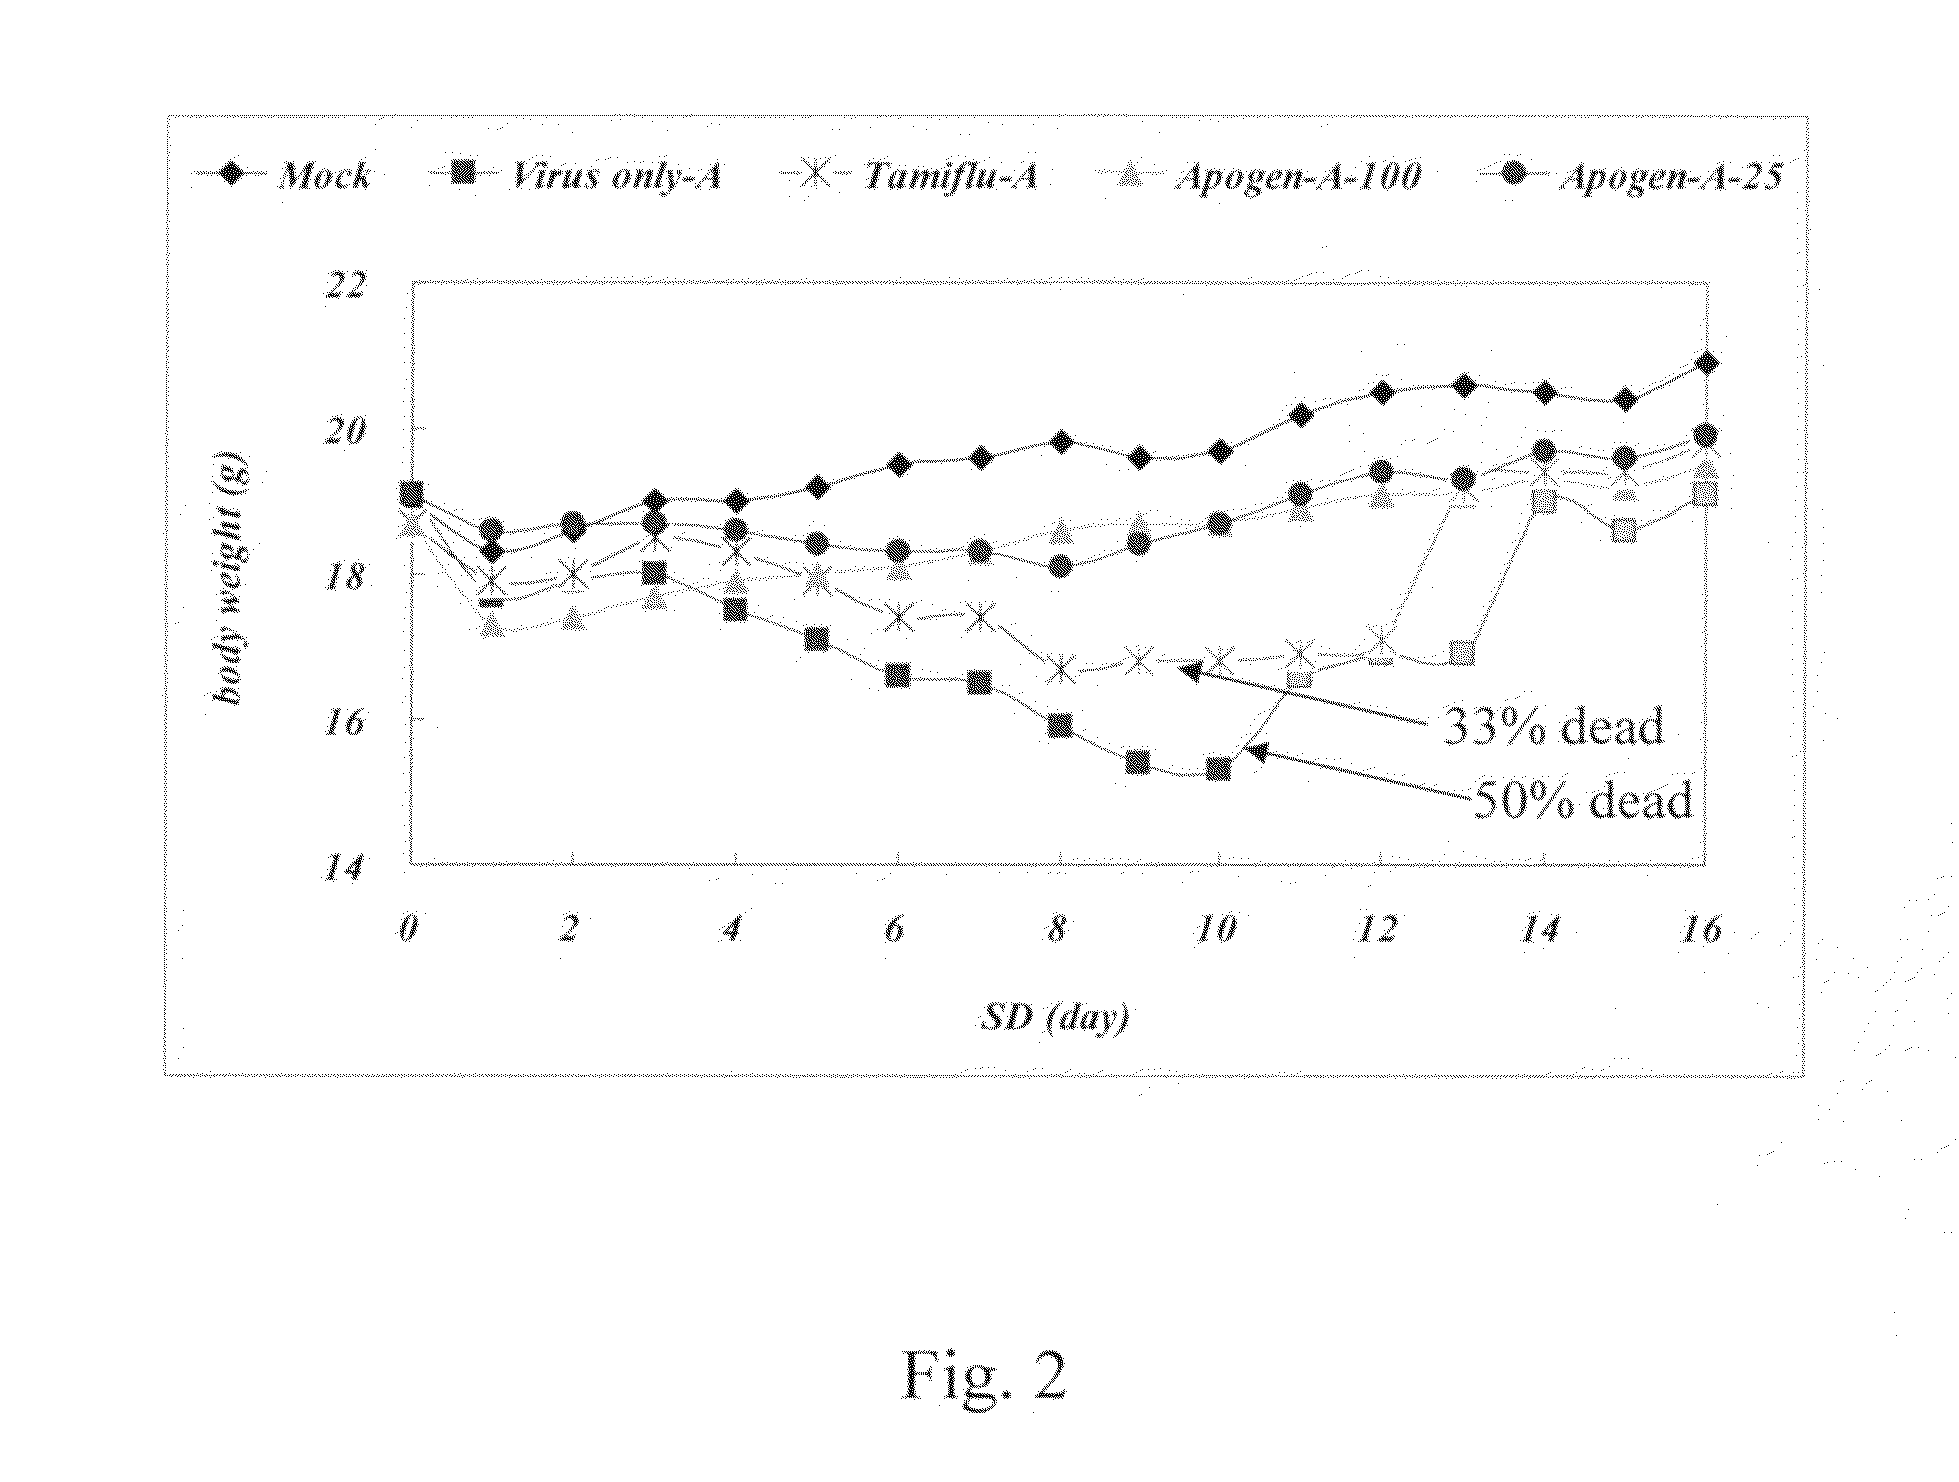 Method for inhibiting infection and reproduction of influenza type A WSN virus